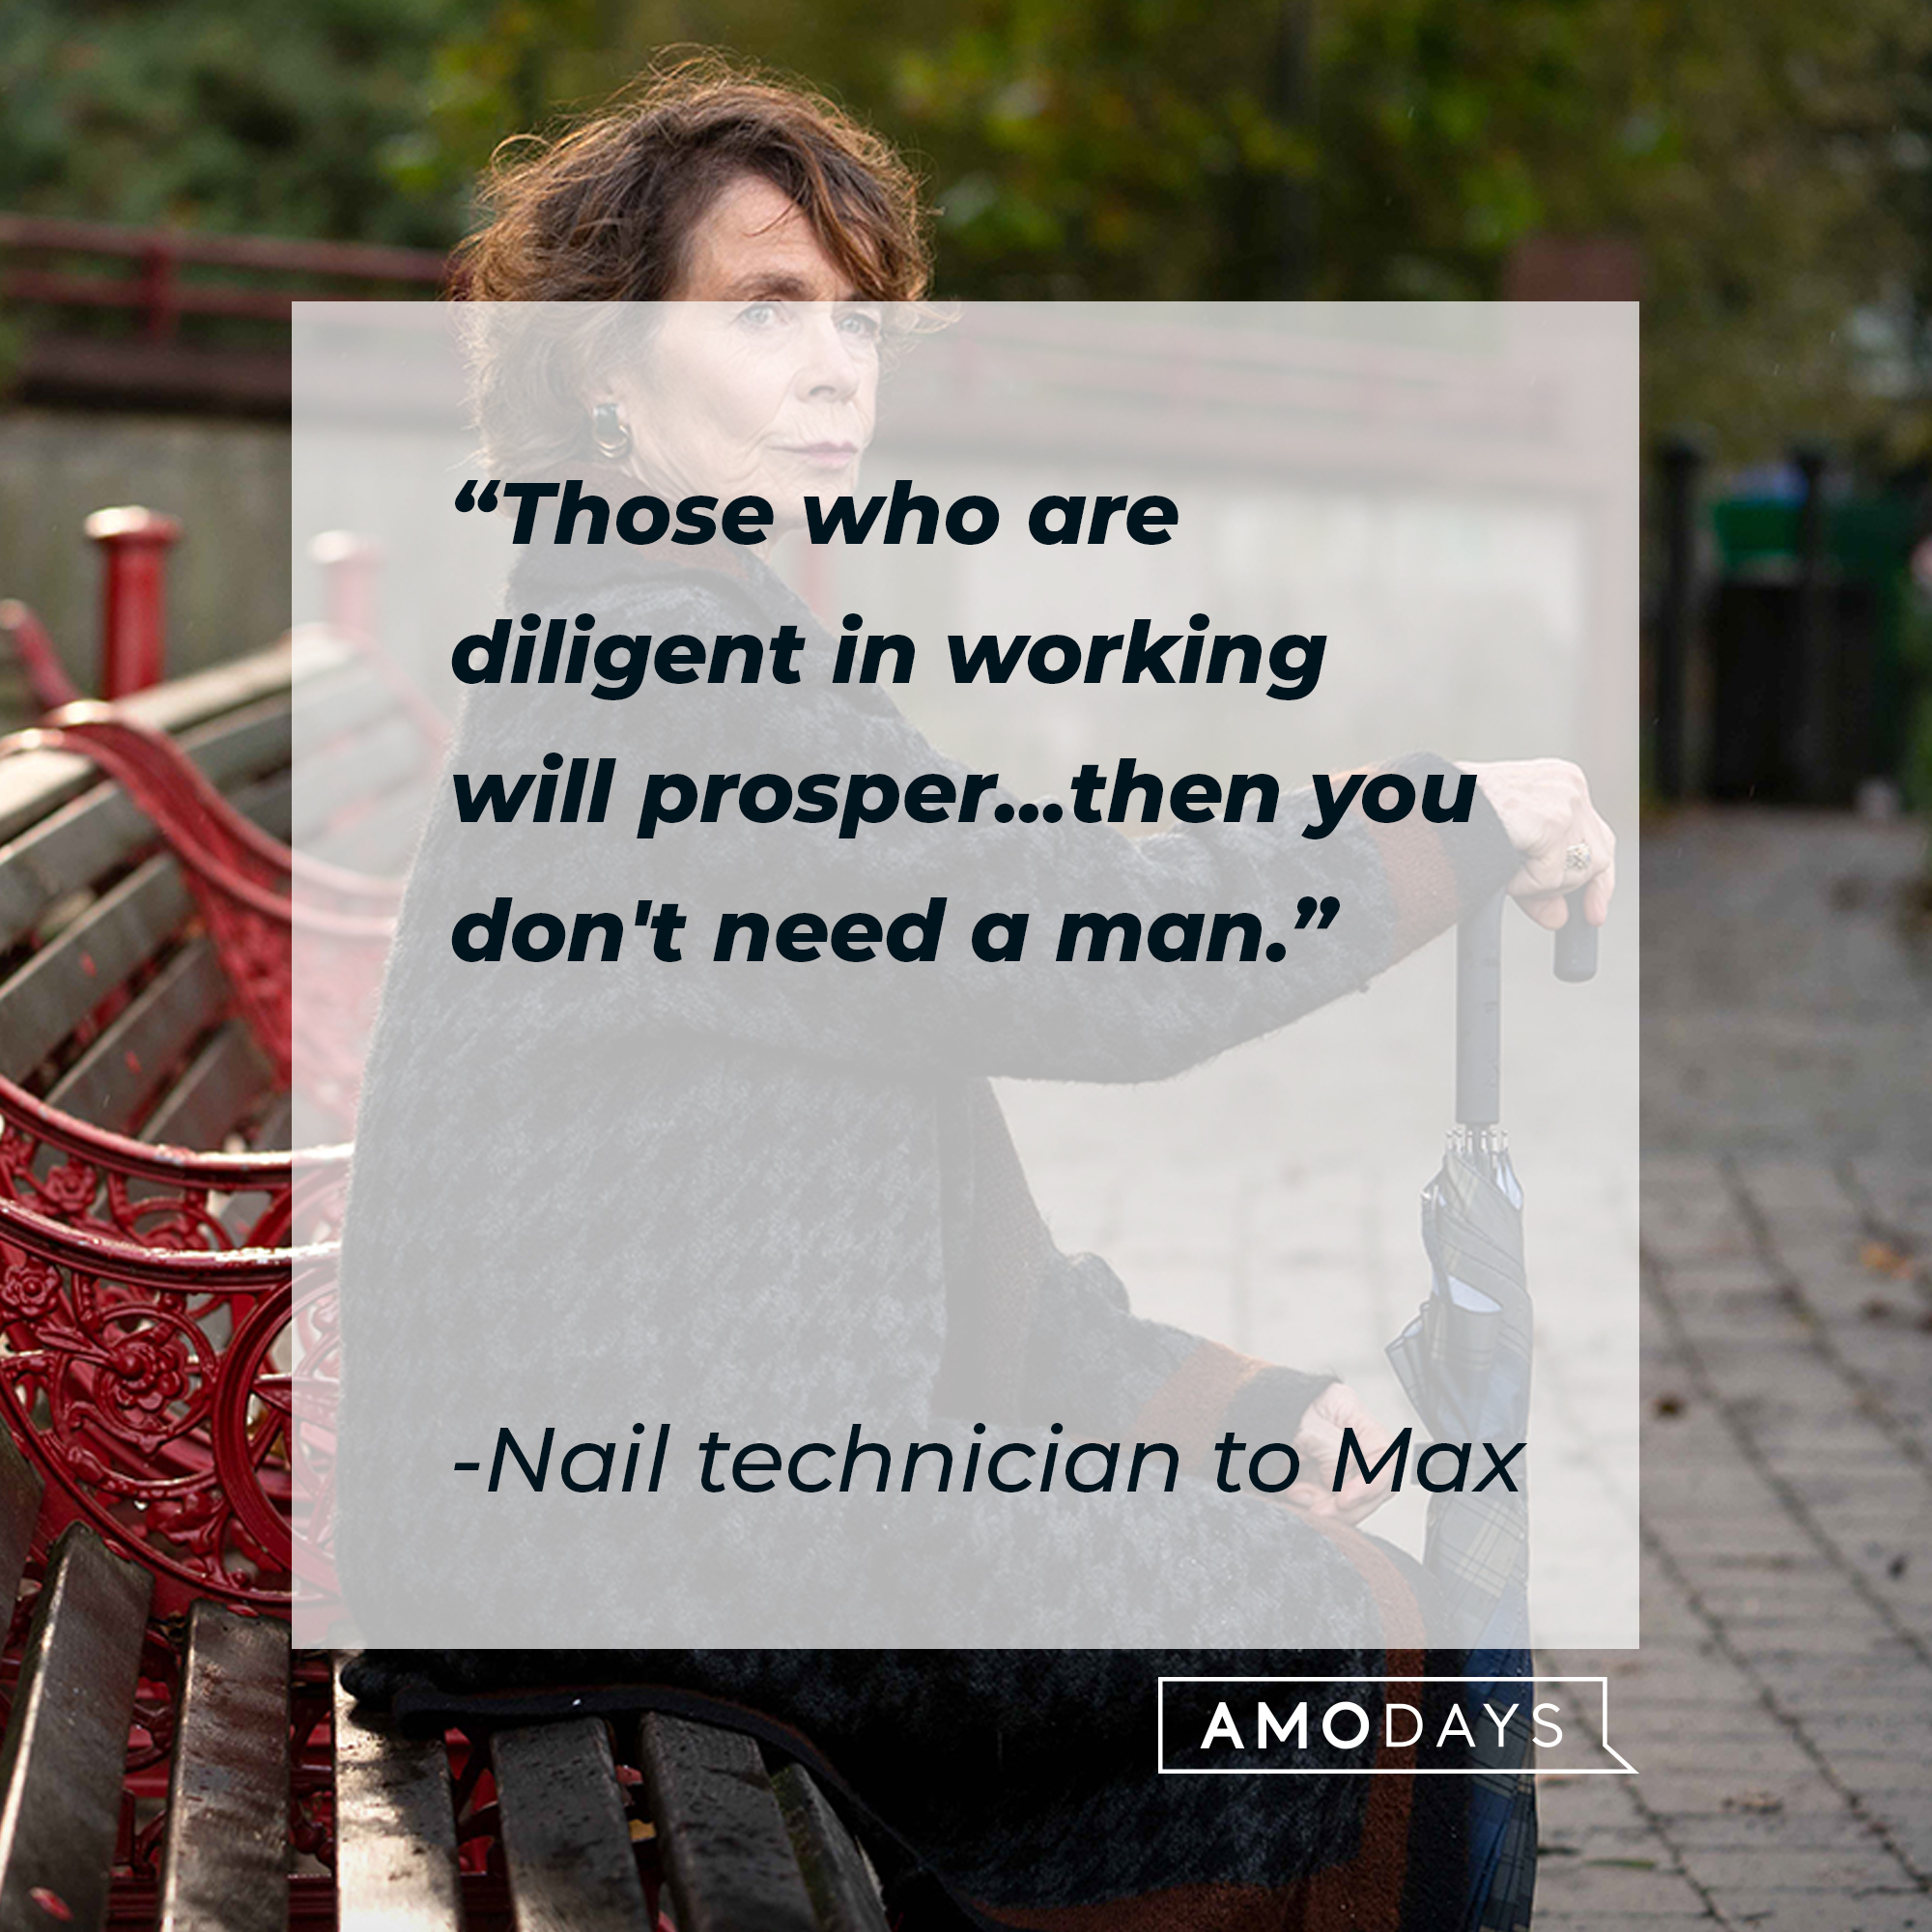 Nail technician's quote to Max: "Those who are diligent in working will prosper...then you don't need a man." | Source: facebook.com/BetterThingsFX